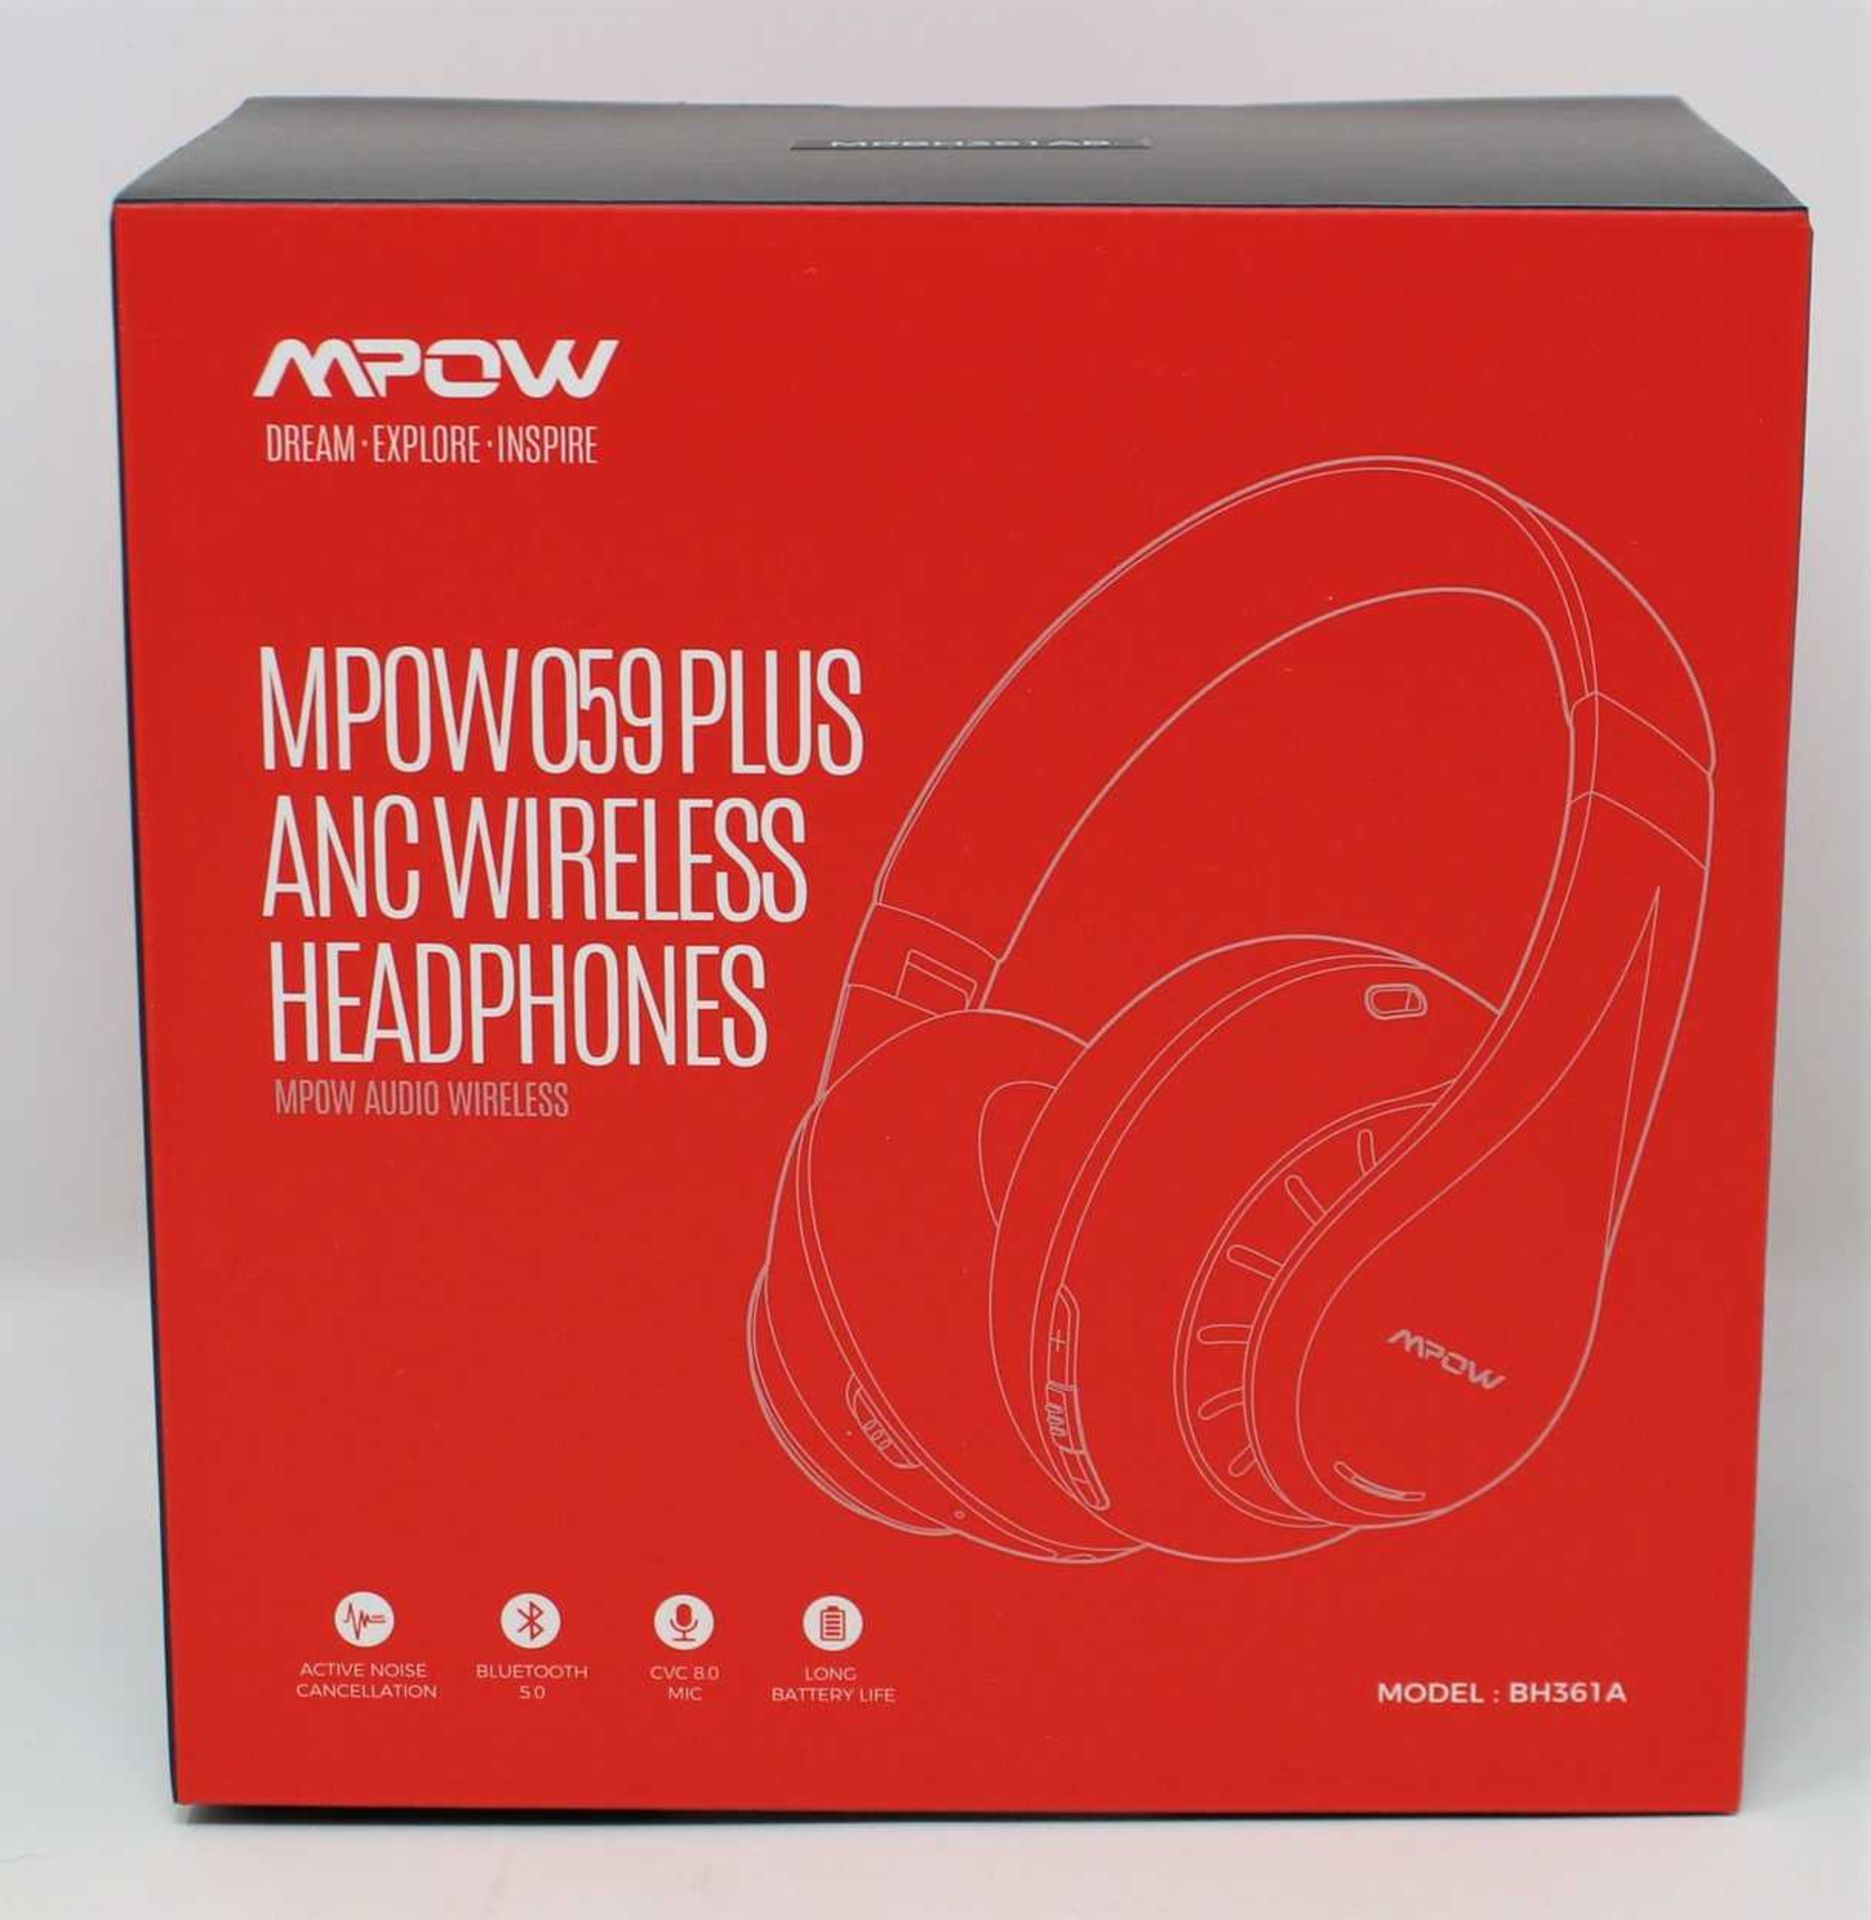 A boxed as new pair of Mpow 059 Plus Active Noise Cancelling Headphones in Black & Red (MPBH361AB).